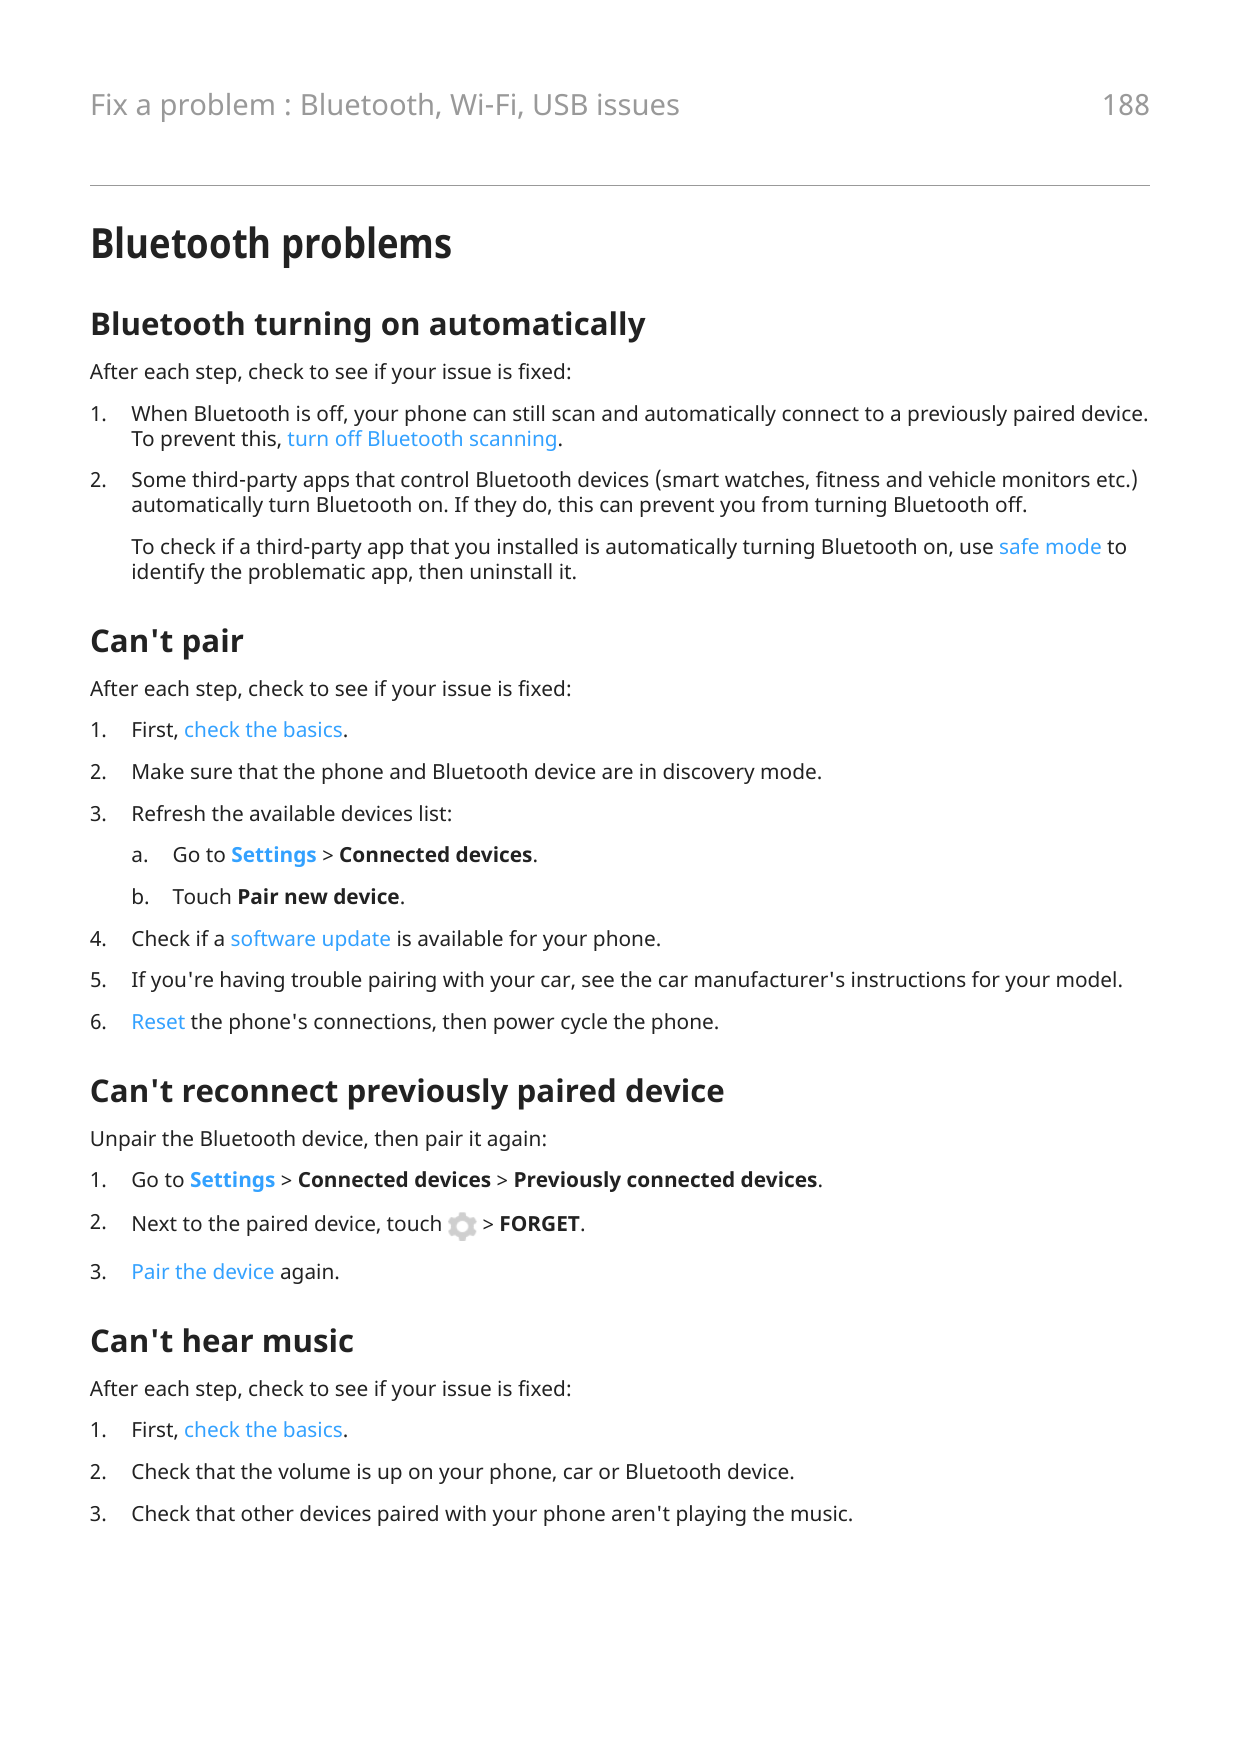 Fix a problem : Bluetooth, Wi-Fi, USB issues188Bluetooth problemsBluetooth turning on automaticallyAfter each step, check to see